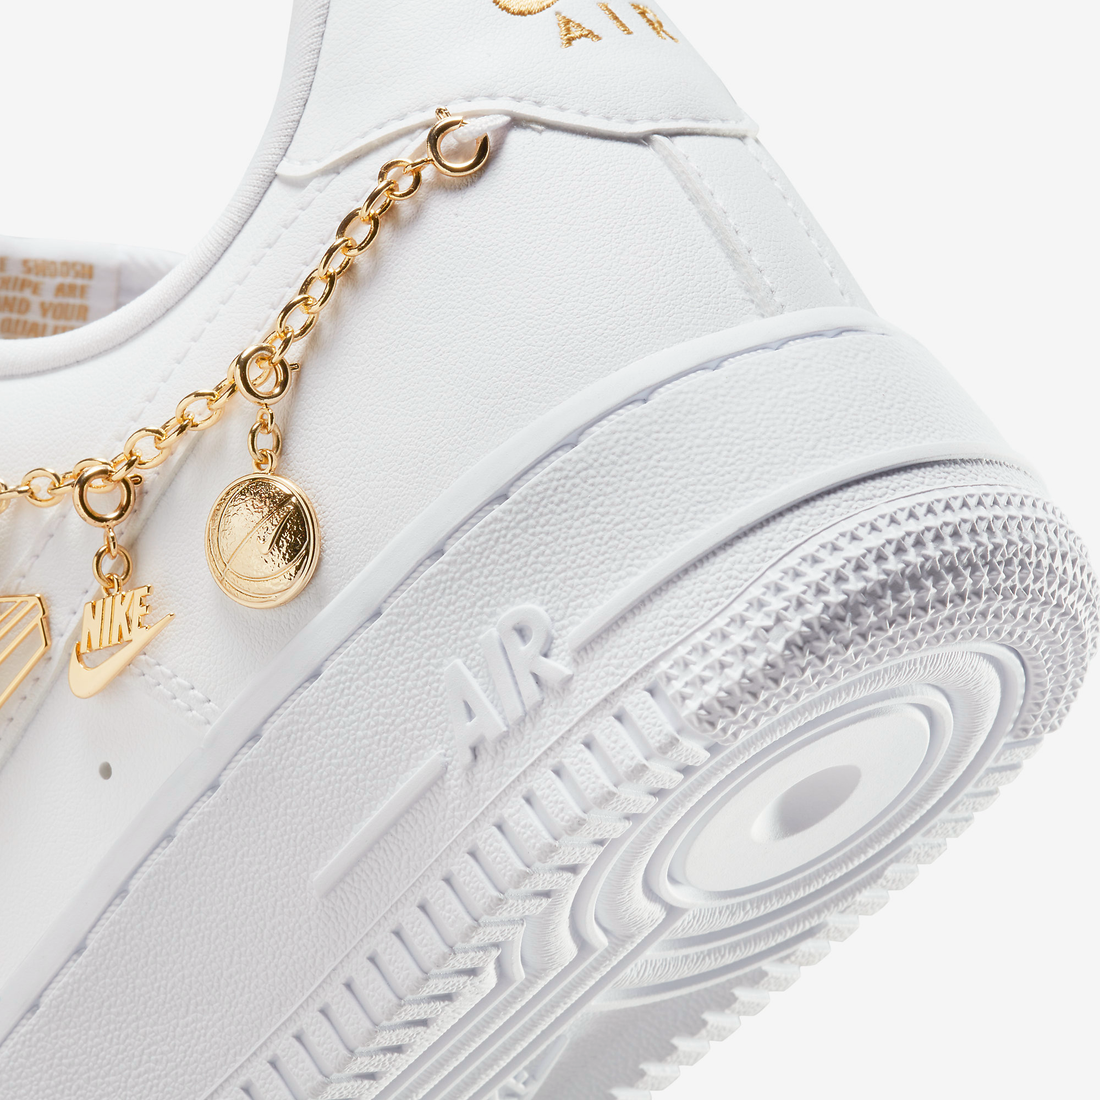 Nike Sneakers, Air Force 1 Low LX ‘White Pendant’ (W)